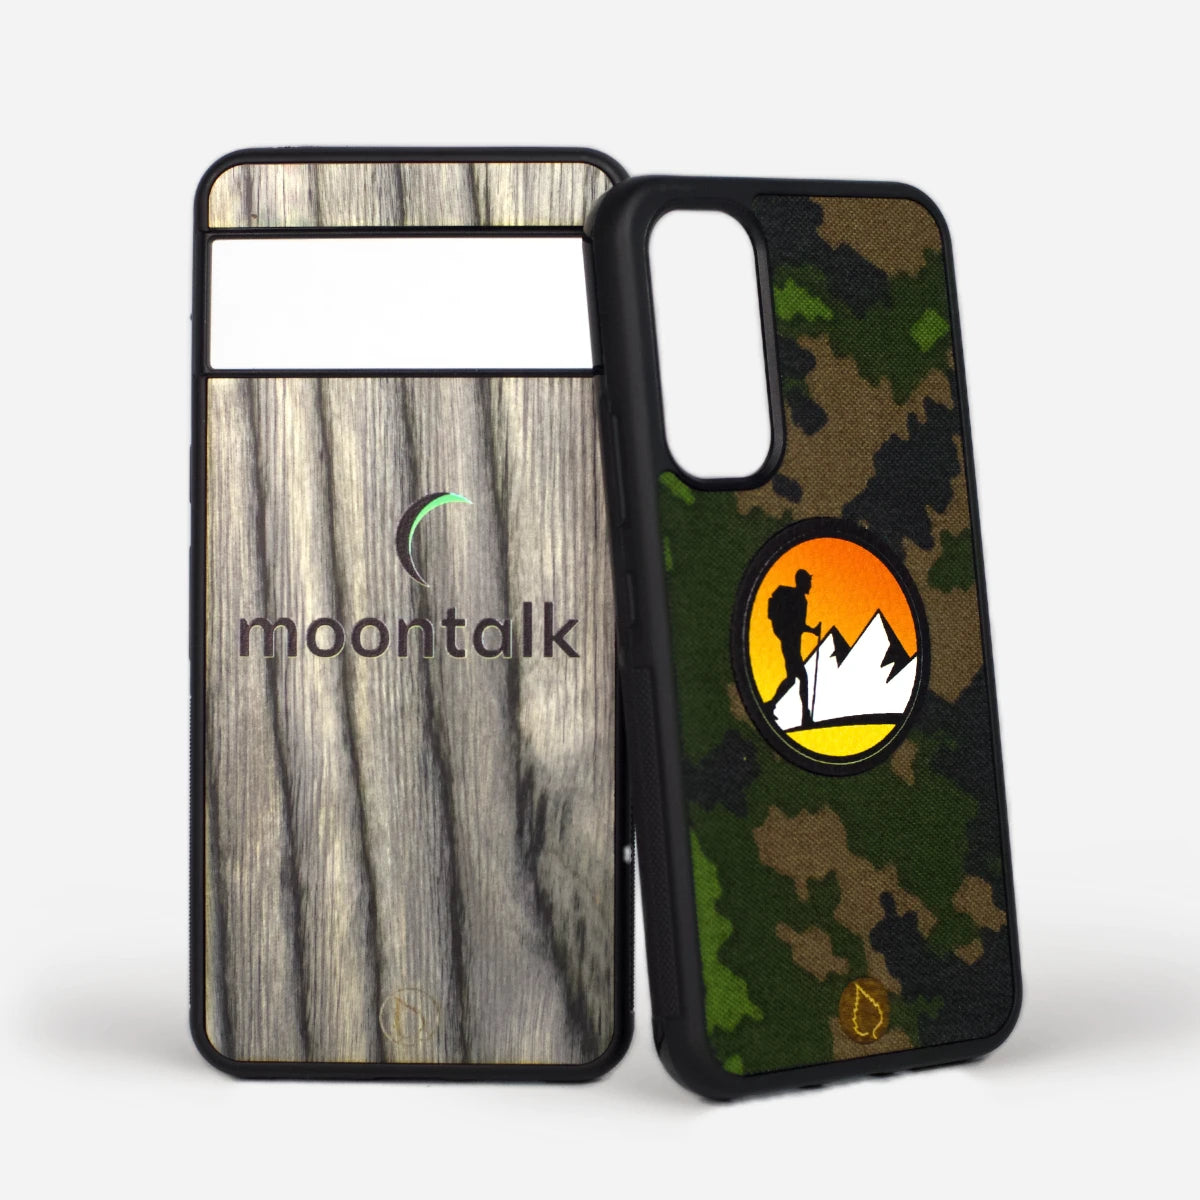 Custom-Made Phone Cases for Brands and Business